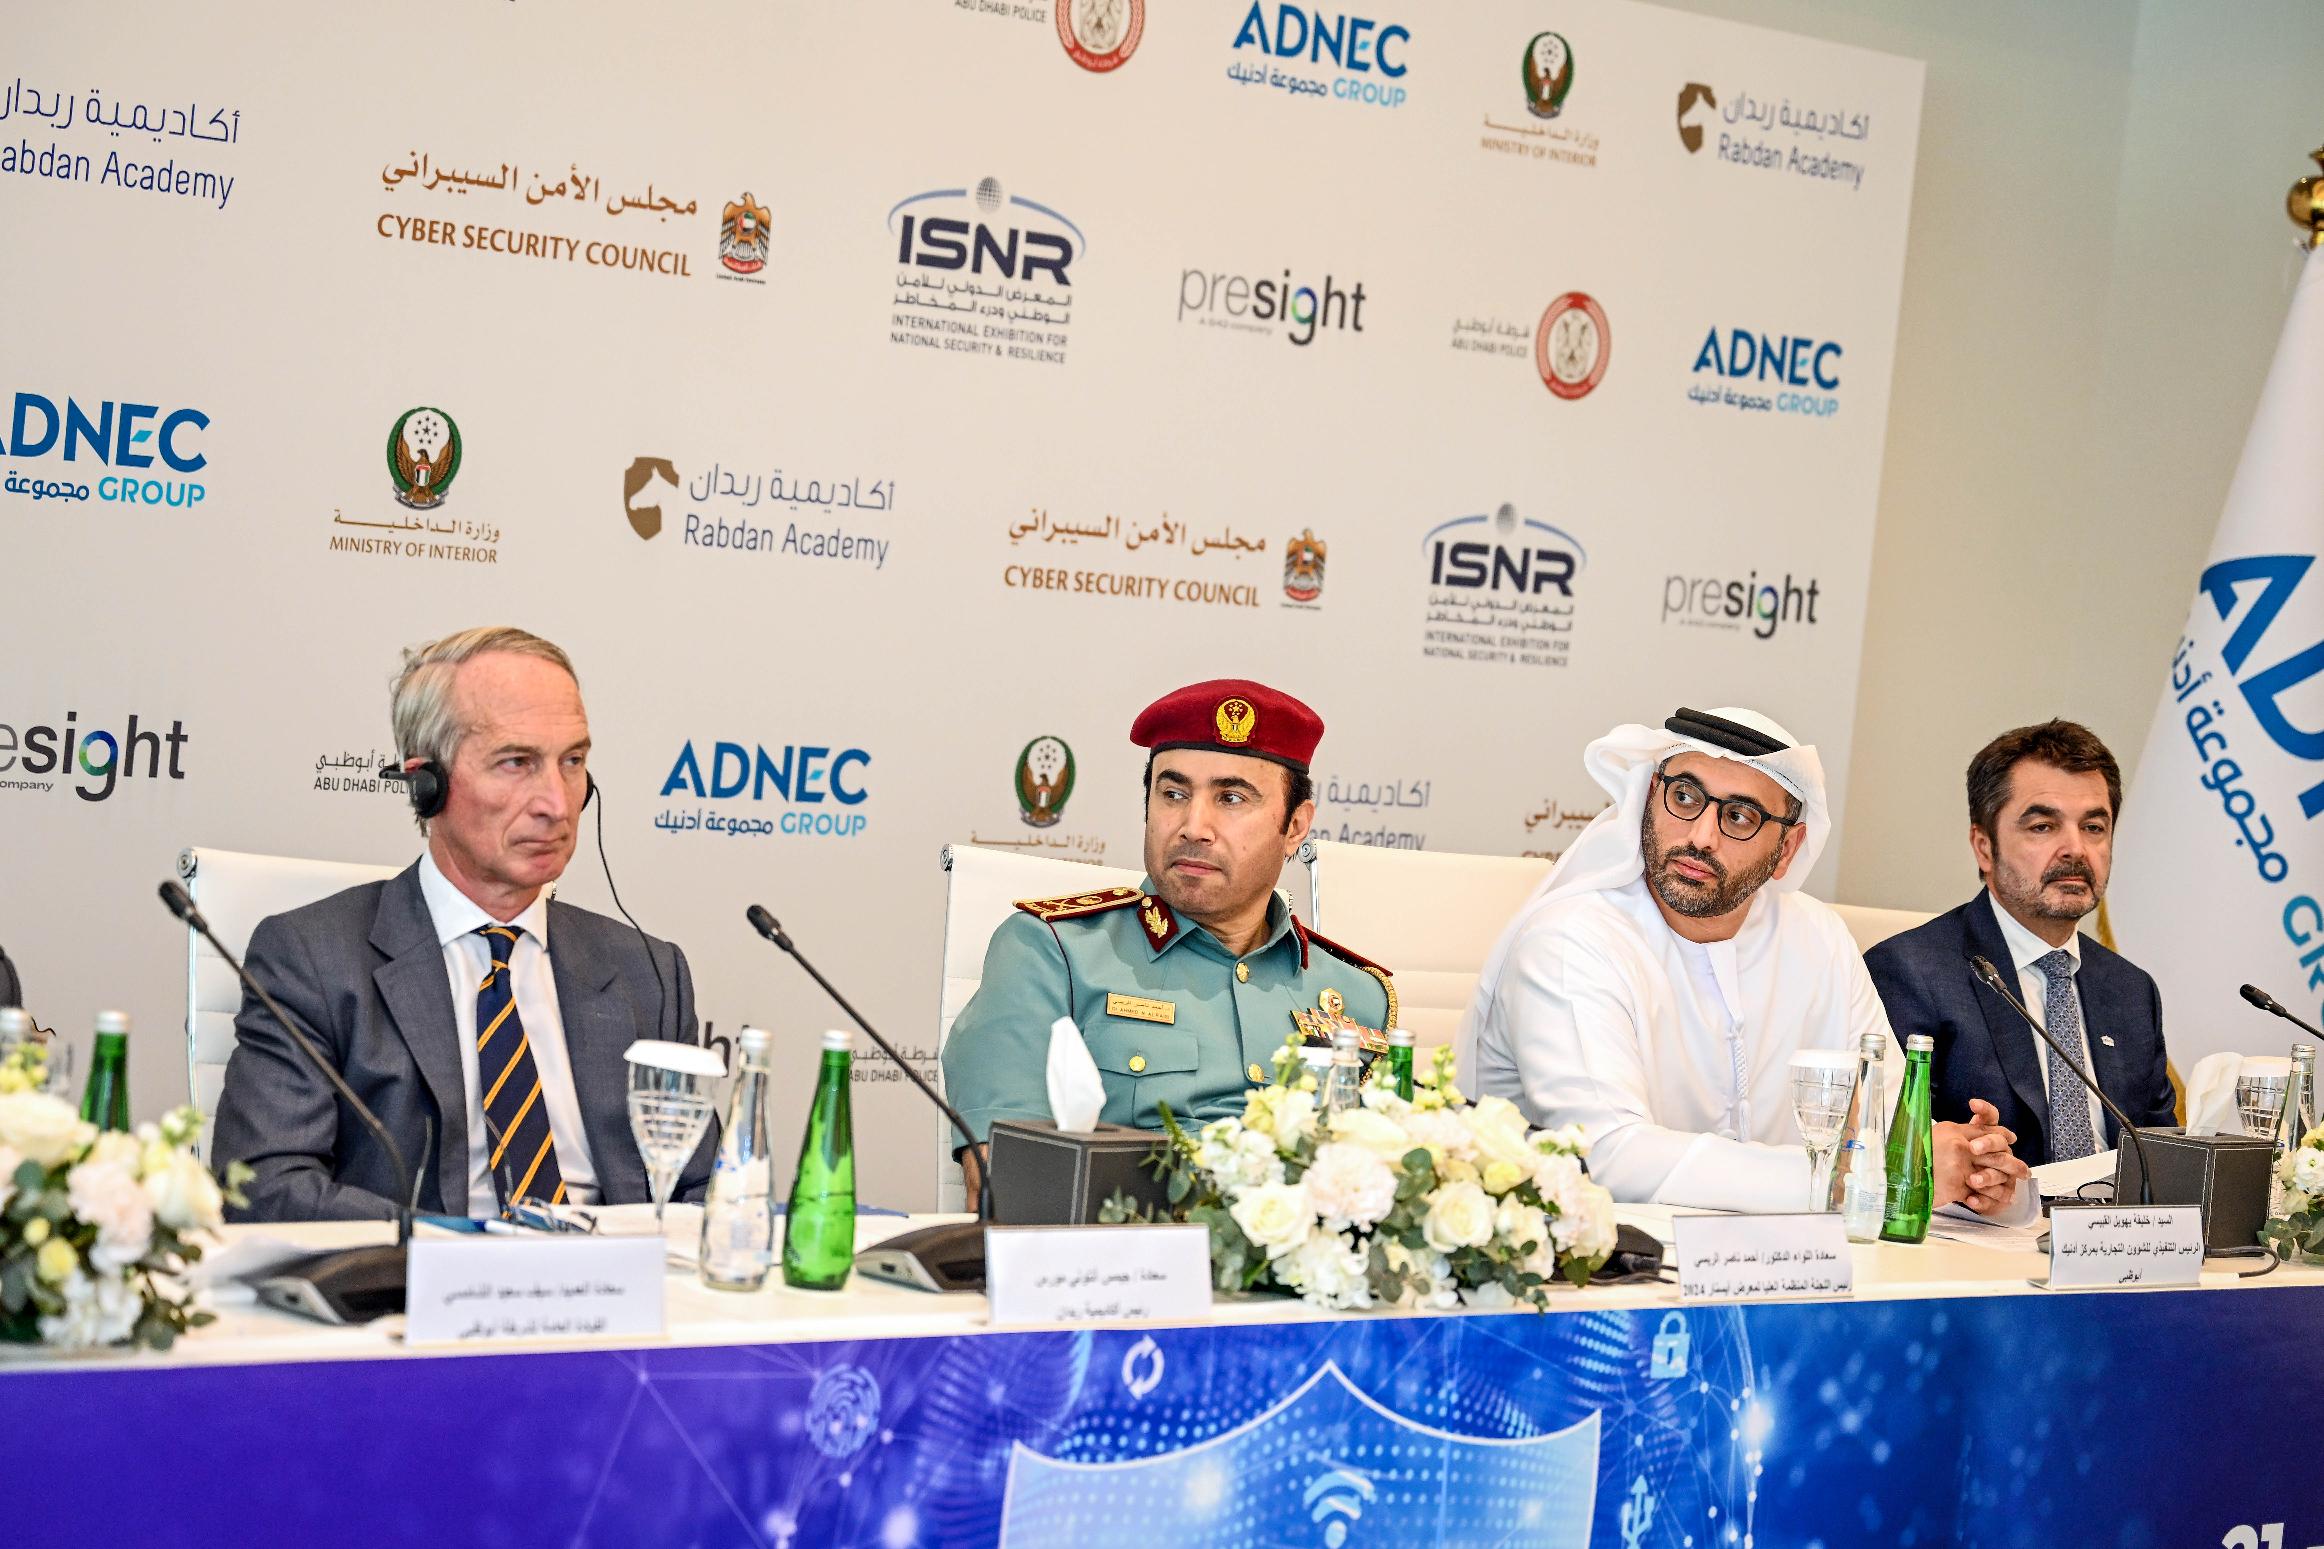 Largest edition of ISNR to begin on 21st May in Abu Dhabi